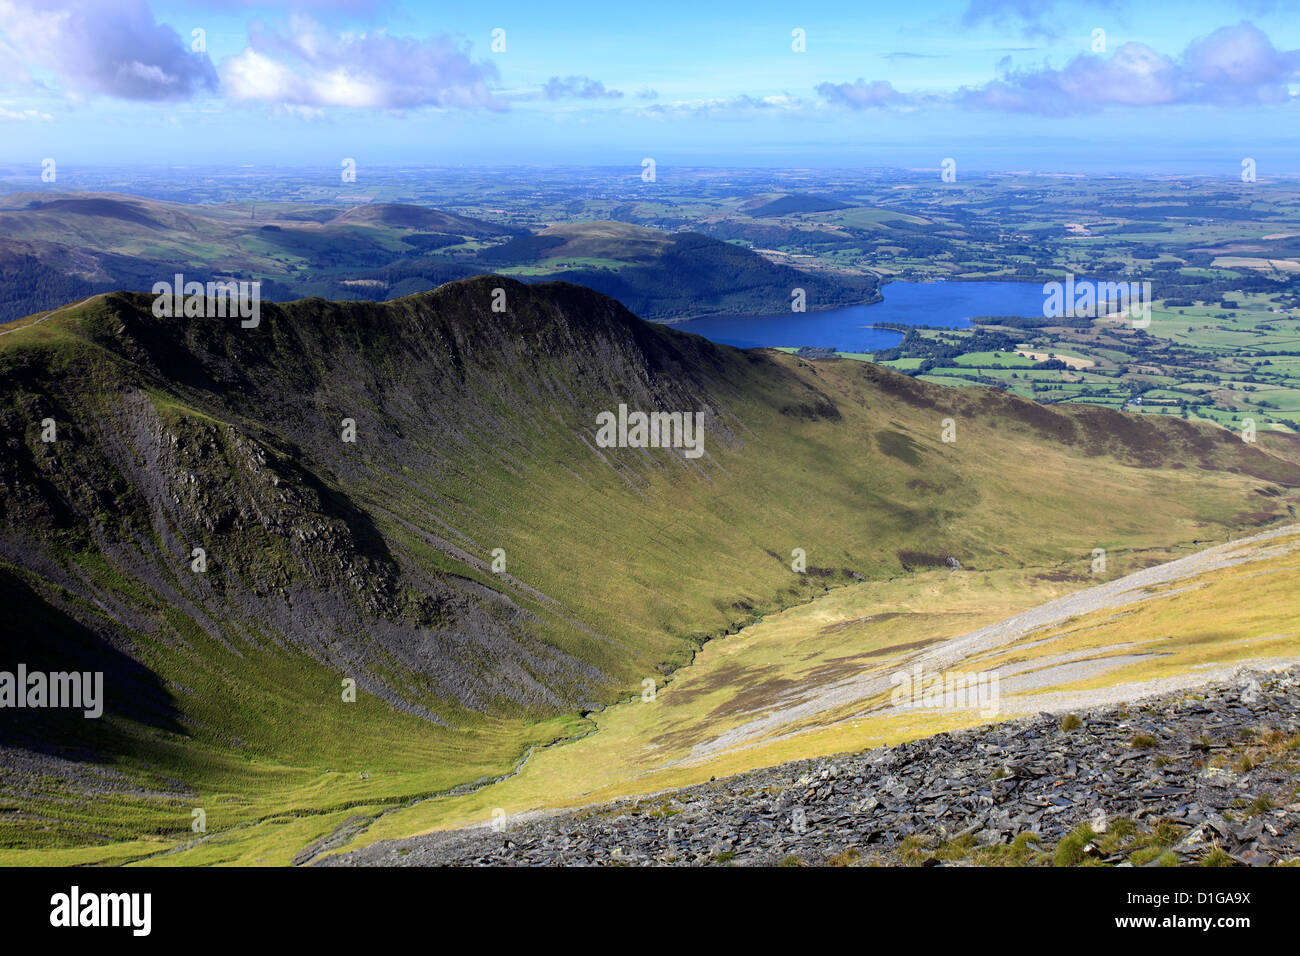 Landscape view over Long Side Fell and Ullock Pike Fell ridge, Keswick, Lake District National Park, Cumbria, England, UK Stock Photo